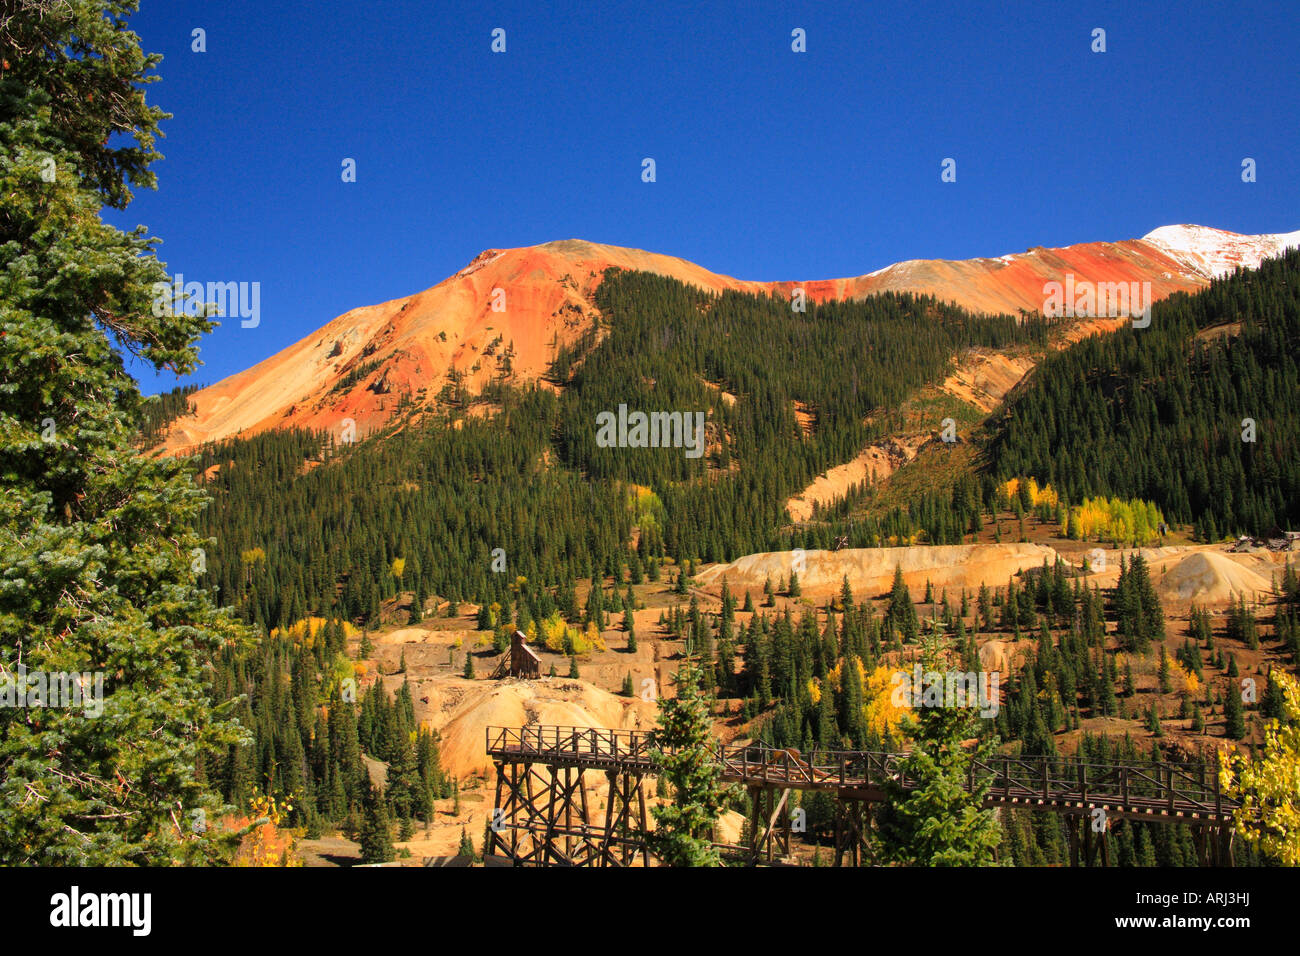 Yankee Girl Mine, Red Mountain, Million Dollar Highway, Ouray, Colorado, USA Banque D'Images